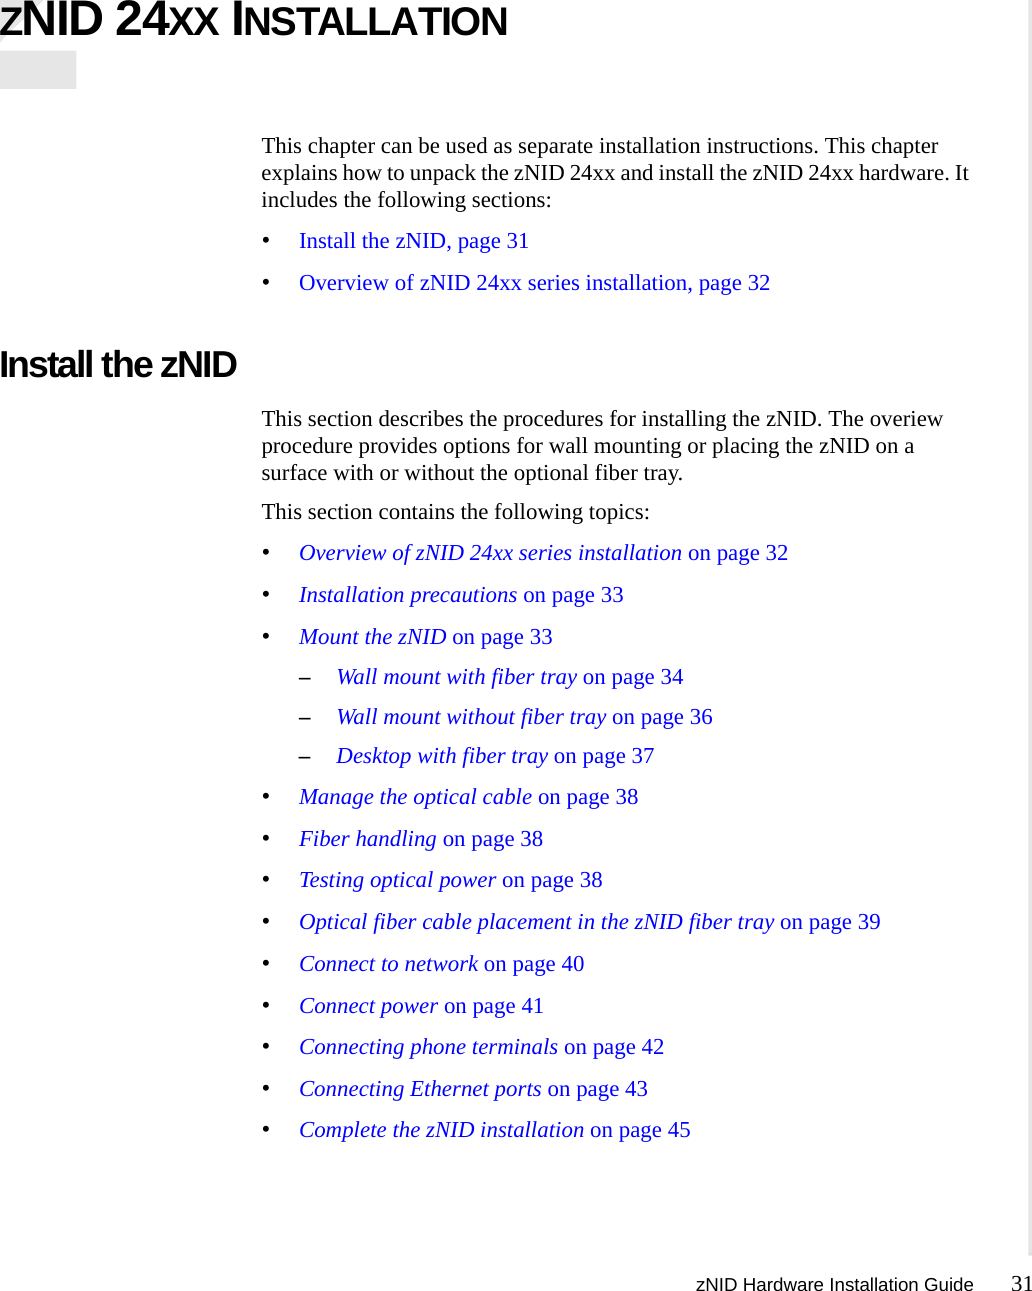 zNID Hardware Installation Guide 31  ZNID 24XX INSTALLATIONThis chapter can be used as separate installation instructions. This chapter explains how to unpack the zNID 24xx and install the zNID 24xx hardware. It includes the following sections:•Install the zNID, page 31•Overview of zNID 24xx series installation, page 32Install the zNIDThis section describes the procedures for installing the zNID. The overiew procedure provides options for wall mounting or placing the zNID on a surface with or without the optional fiber tray.This section contains the following topics:•Overview of zNID 24xx series installation on page 32•Installation precautions on page 33•Mount the zNID on page 33–Wall mount with fiber tray on page 34–Wall mount without fiber tray on page 36–Desktop with fiber tray on page 37•Manage the optical cable on page 38•Fiber handling on page 38•Testing optical power on page 38•Optical fiber cable placement in the zNID fiber tray on page 39•Connect to network on page 40•Connect power on page 41•Connecting phone terminals on page 42•Connecting Ethernet ports on page 43•Complete the zNID installation on page 45